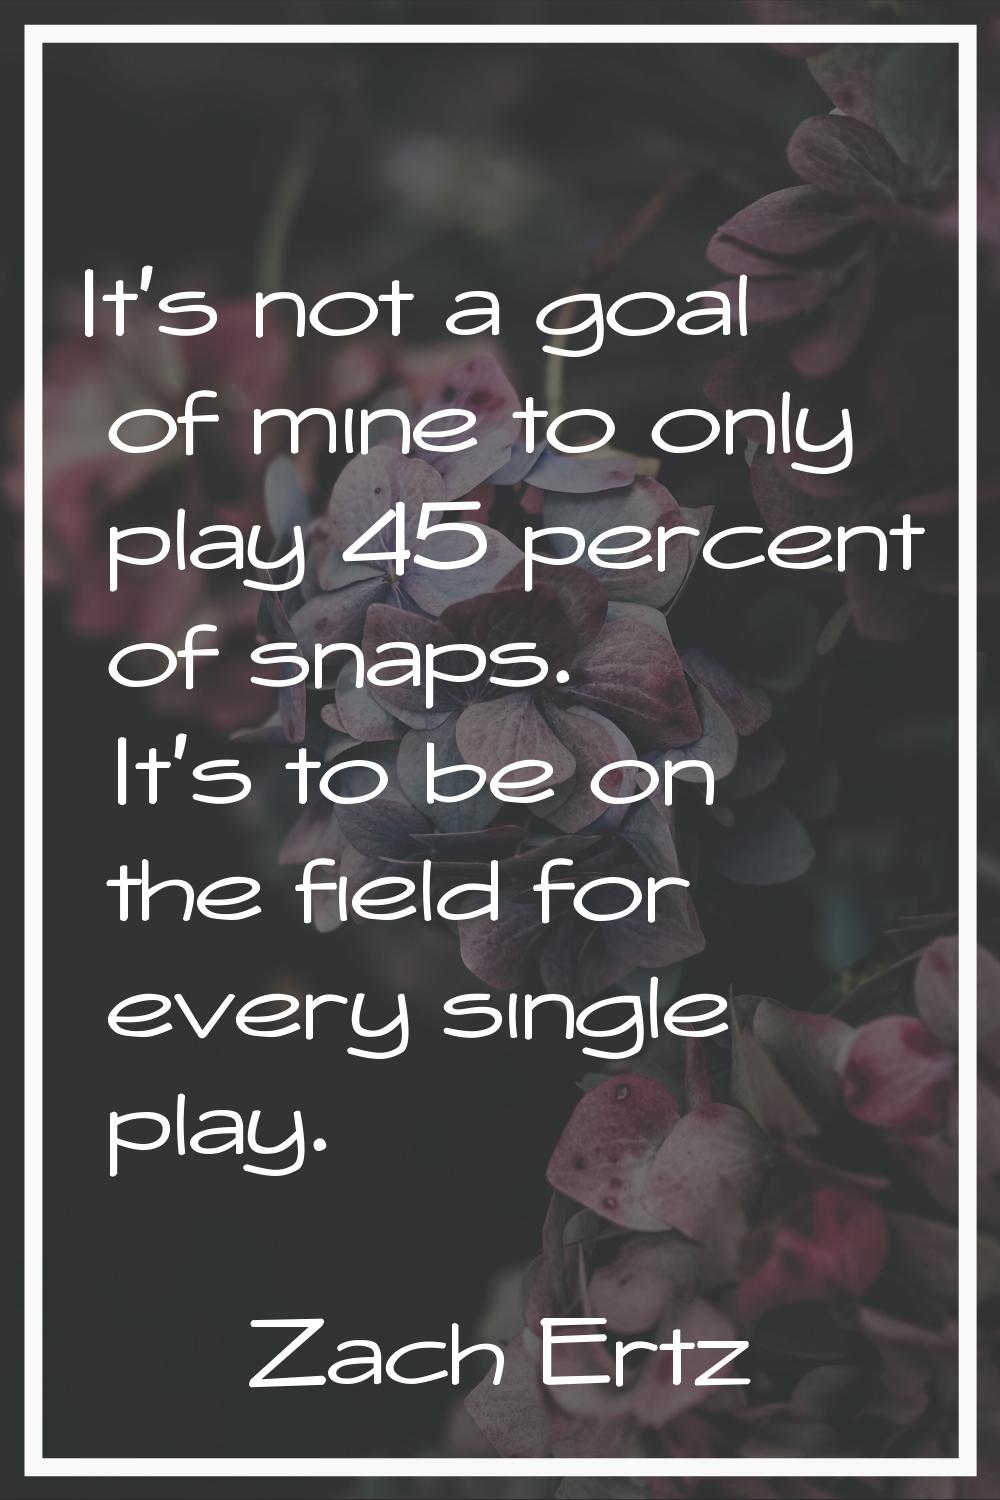 It's not a goal of mine to only play 45 percent of snaps. It's to be on the field for every single 